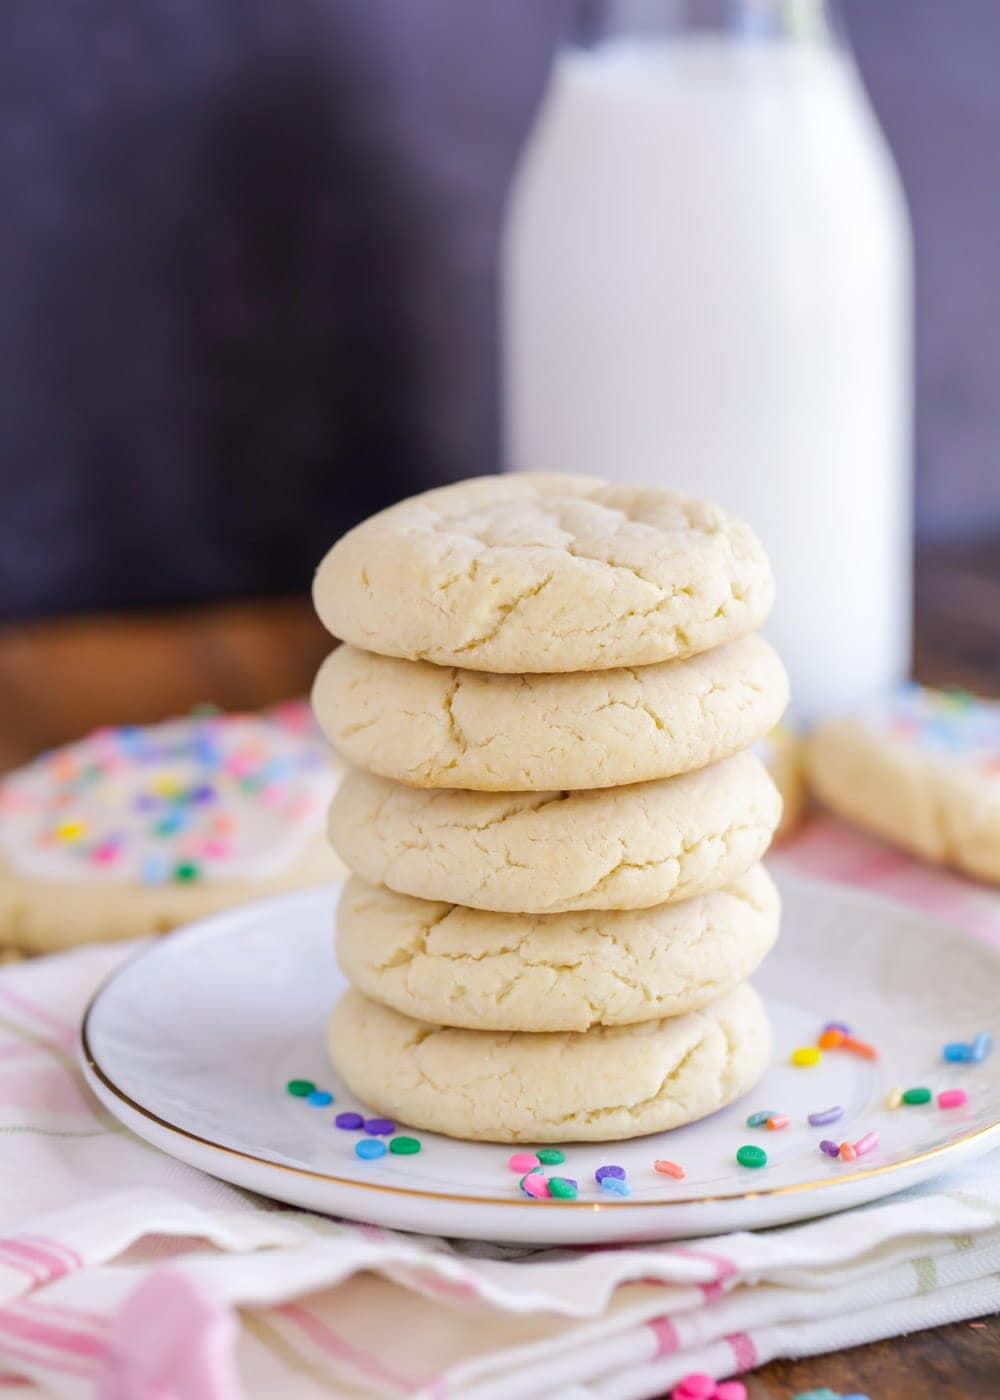 A stack of soft and chewy sugar cookies on a plate